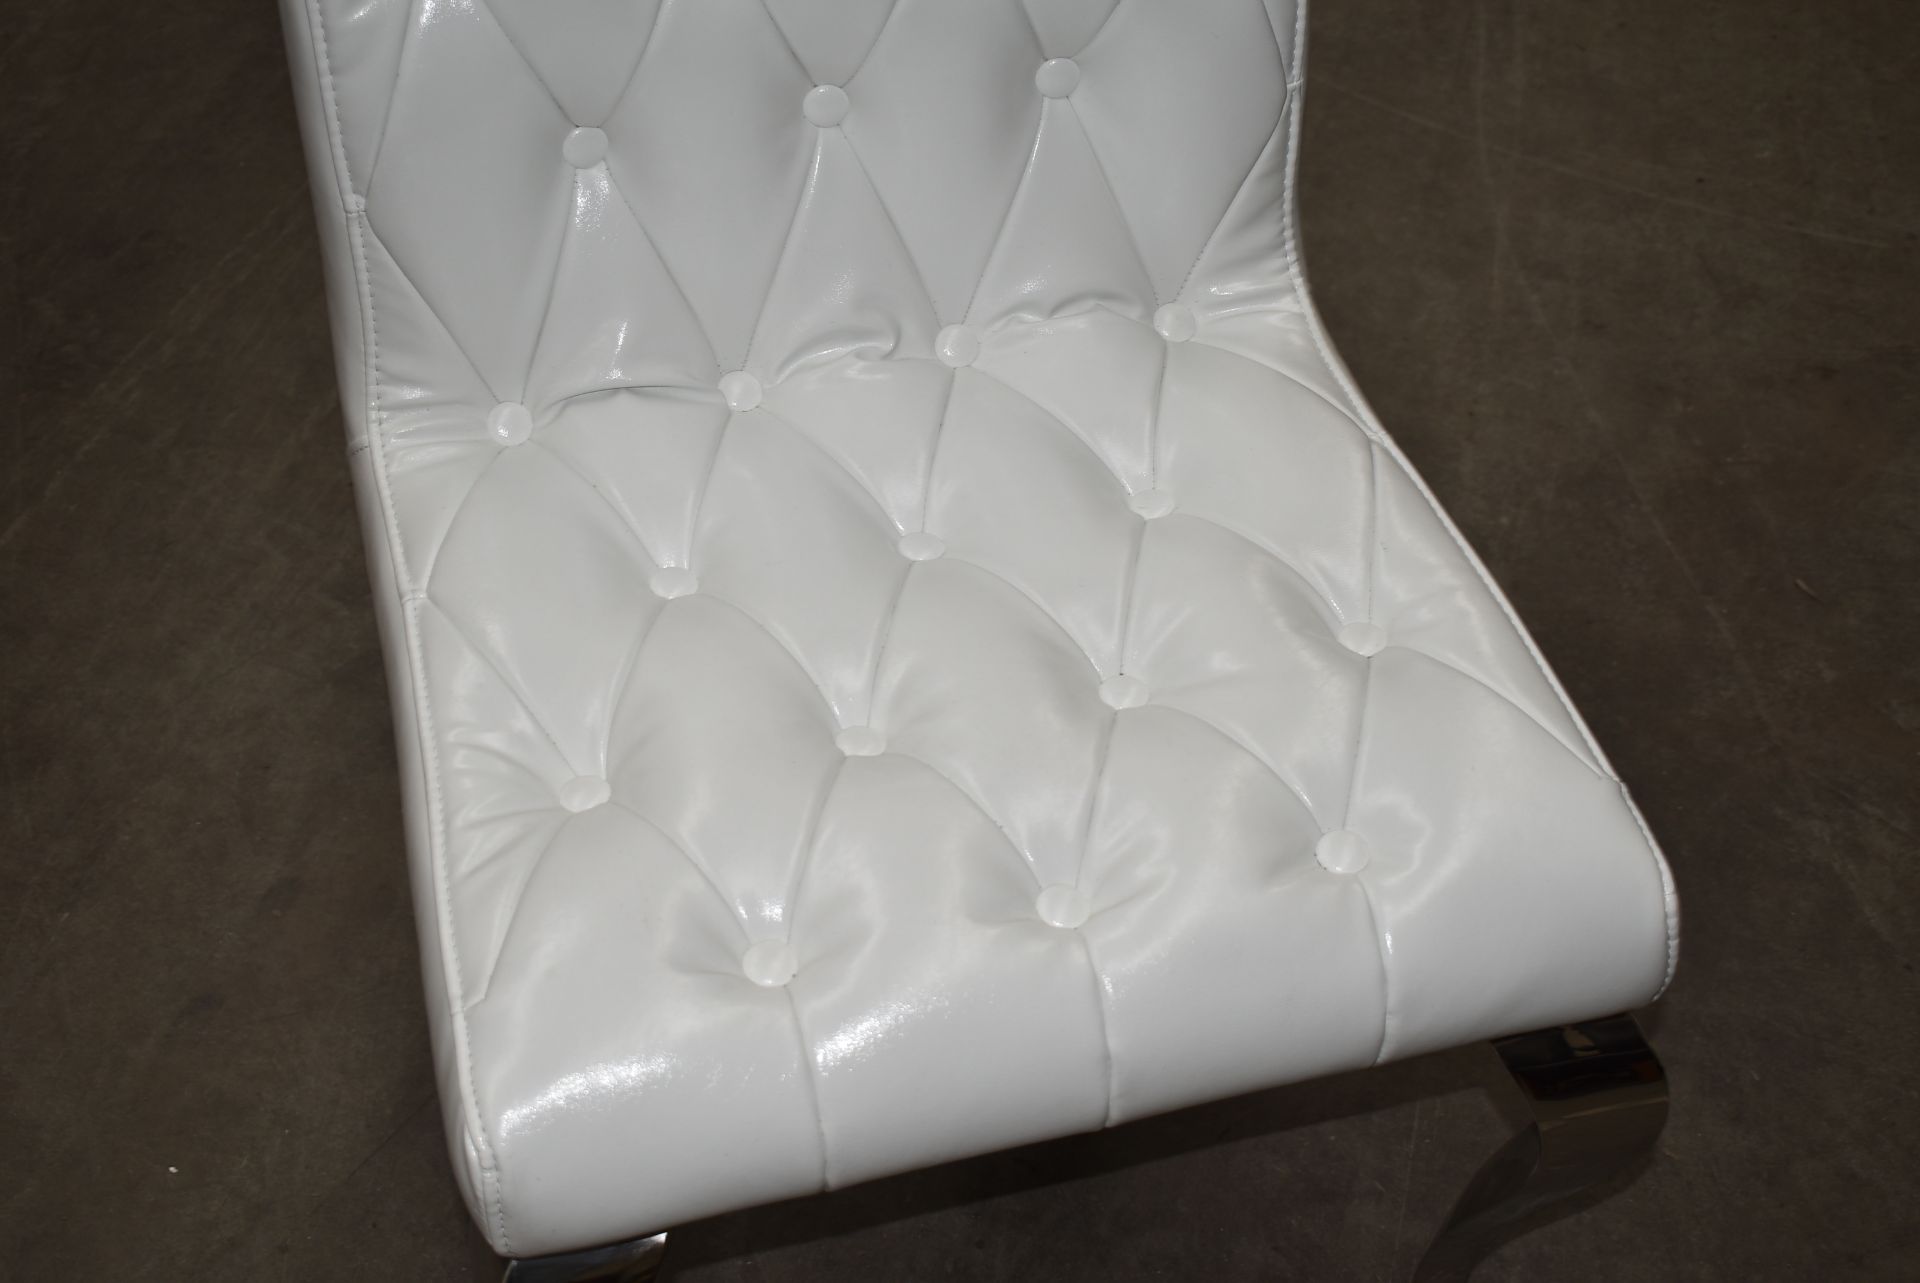 1 x Elegant White Leather Studded Bedroom Chair With Scroll Back and Chrome Legs - CL999 - Ref - Image 4 of 6